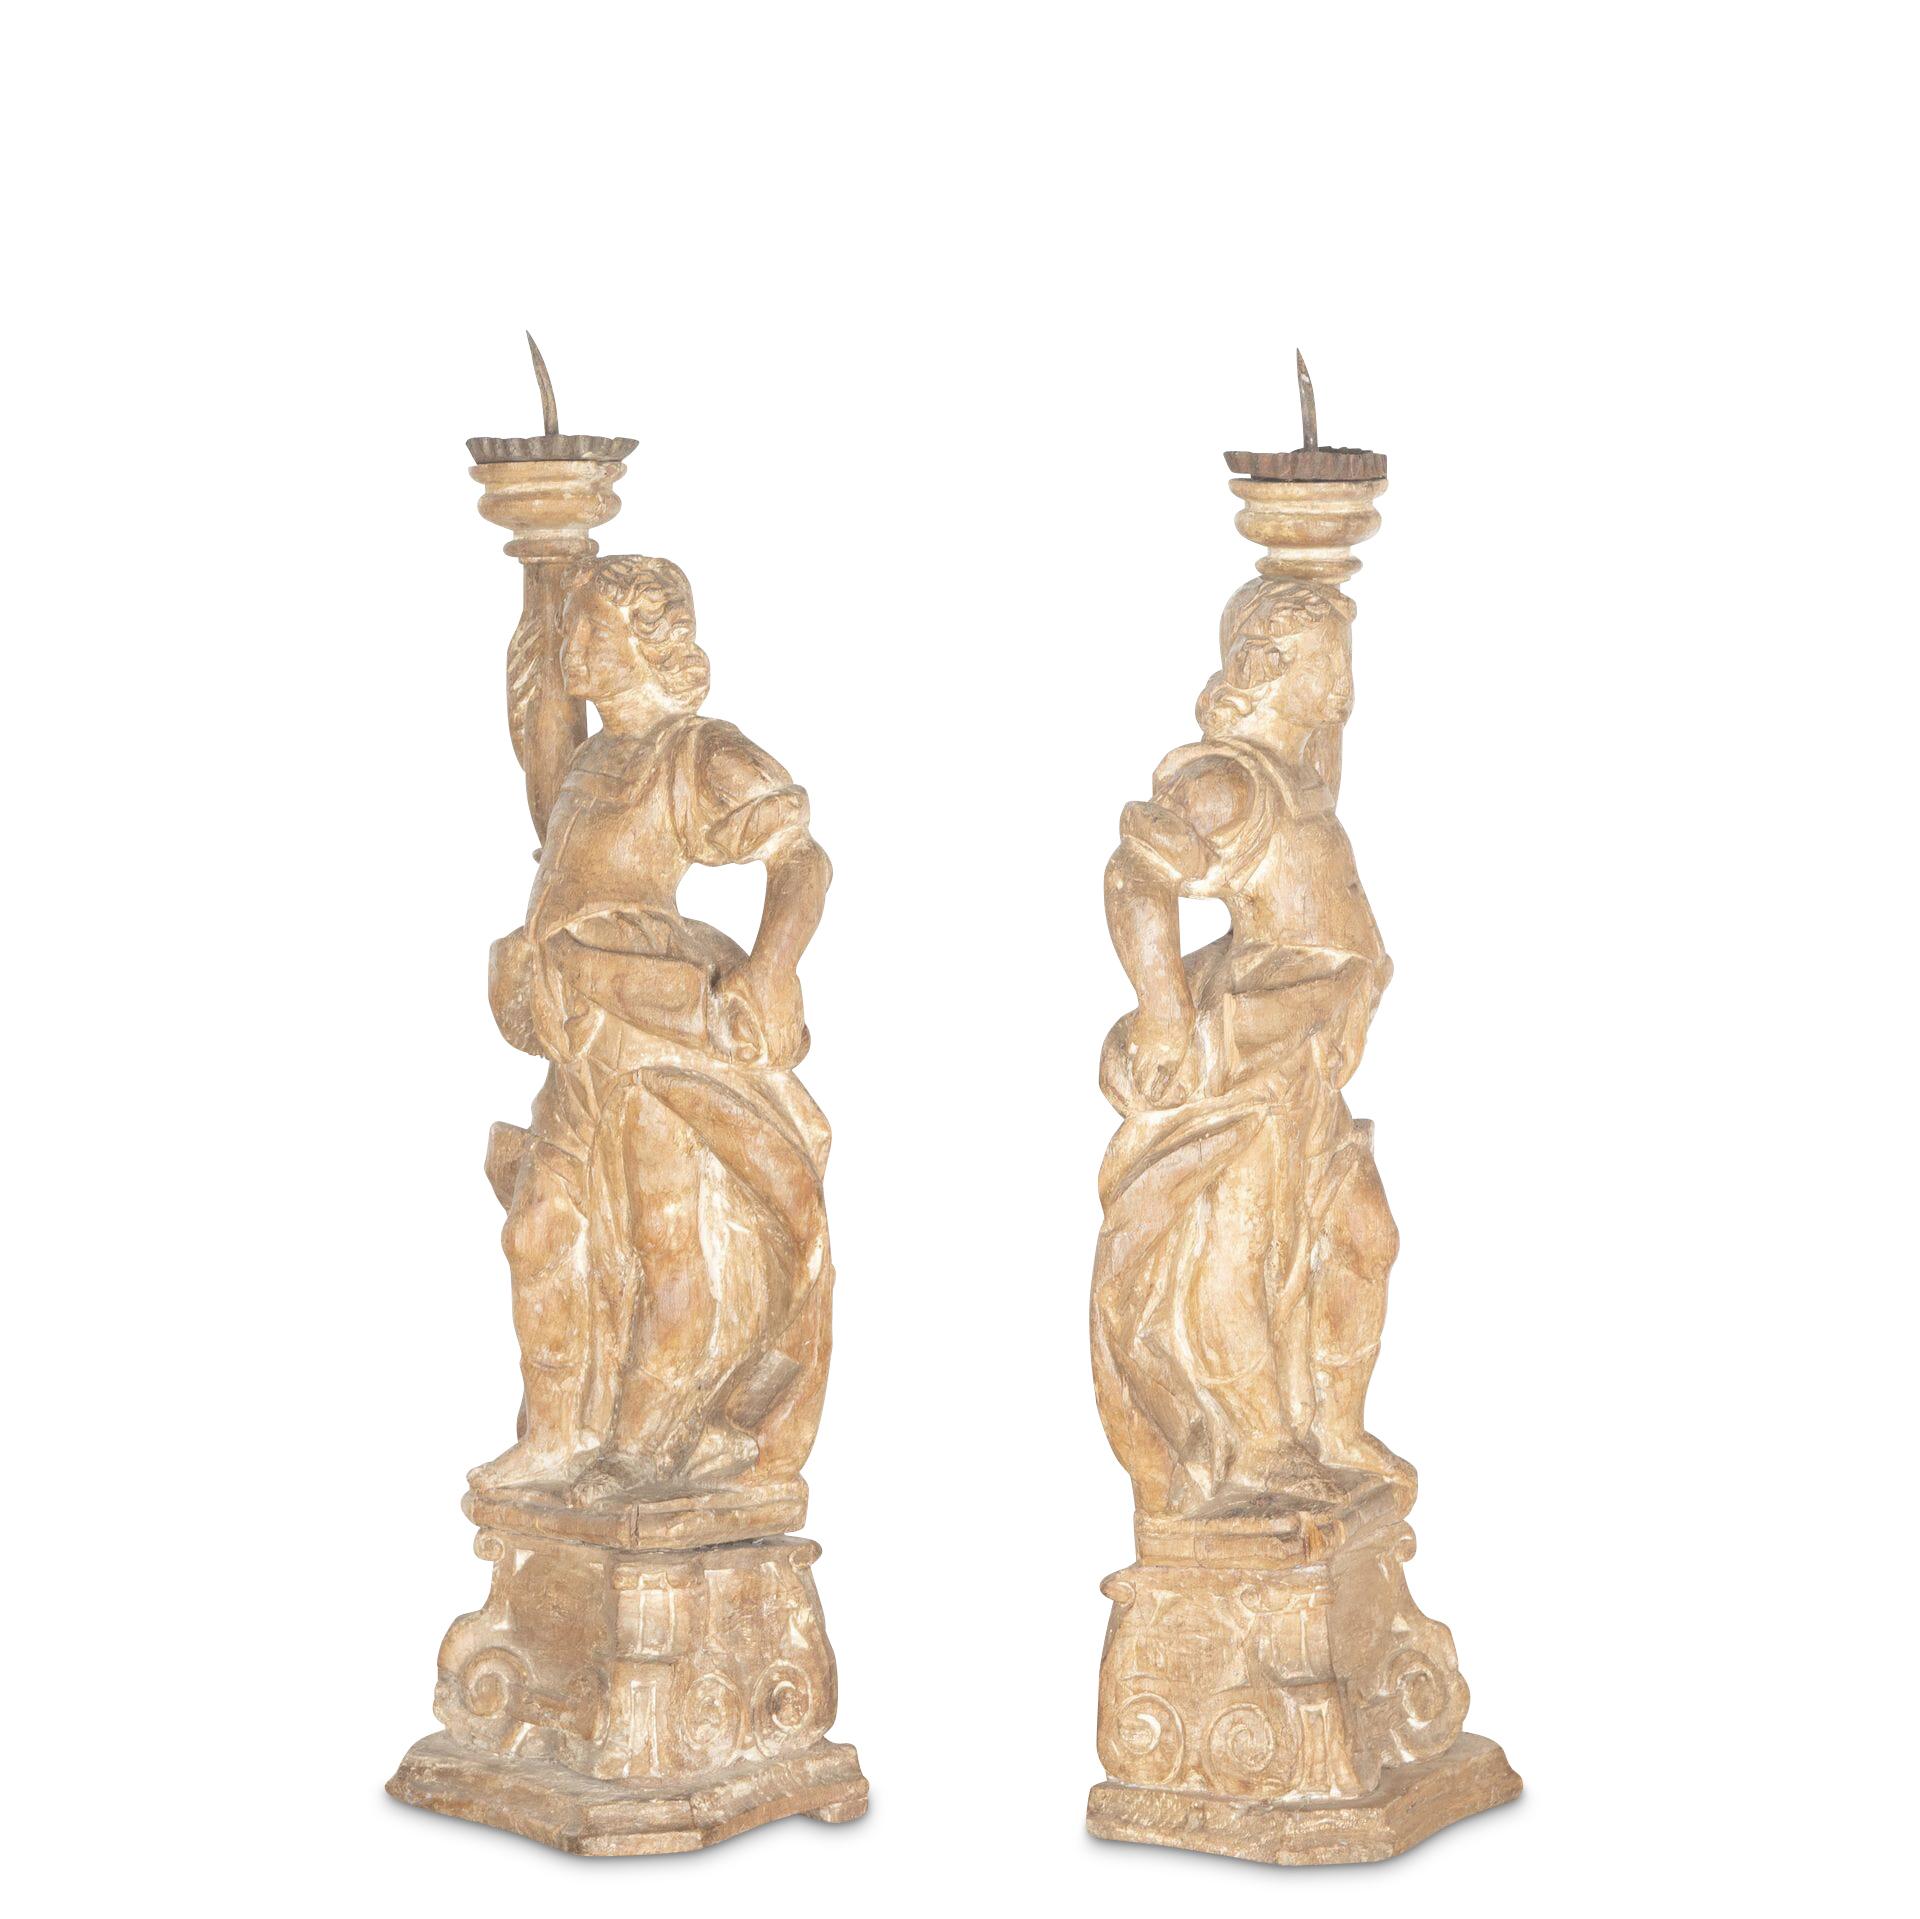 ﻿ A decorative pair of C18th Italian carved lime wood figural candelabra in classical clothing with one arm holding aloft a candle support with metal drip trays, the figures stood on scrolled plinth bases with concave mouldings. Circa 1760.

H: 72